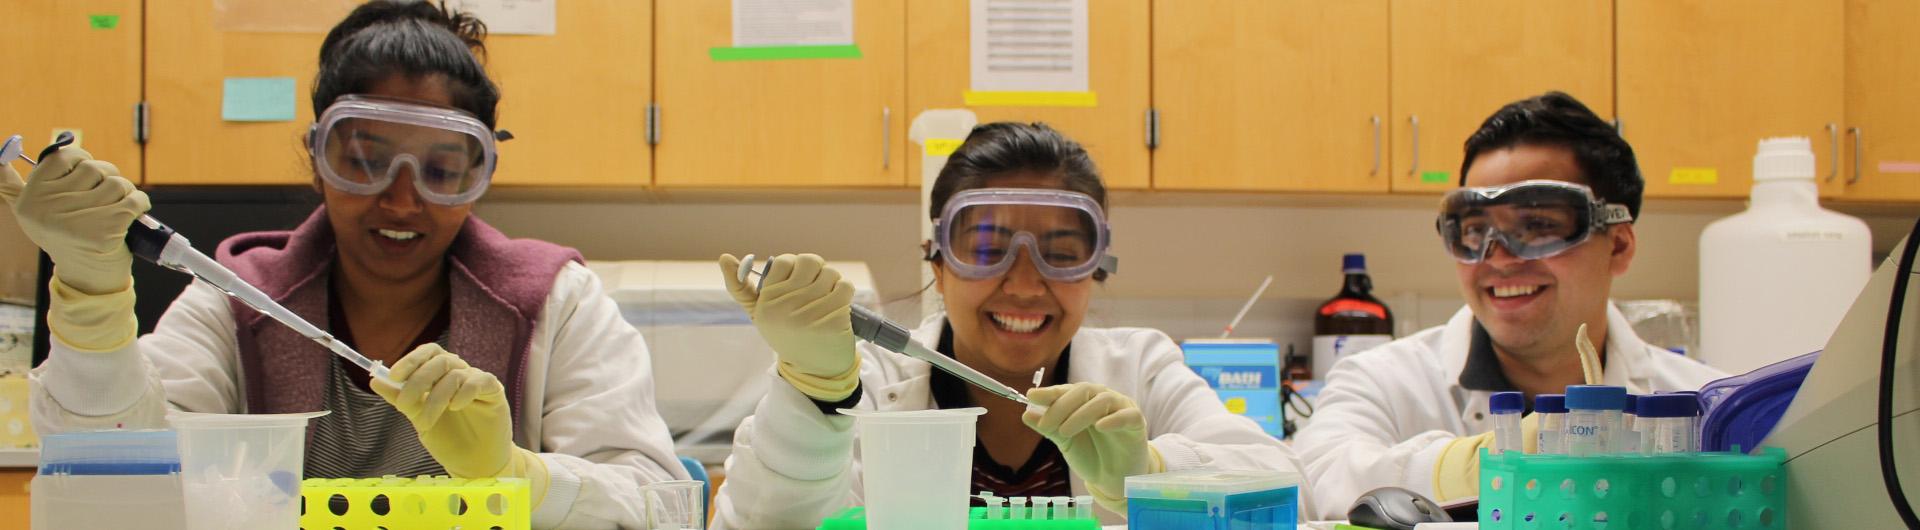 students pipetting in a lab